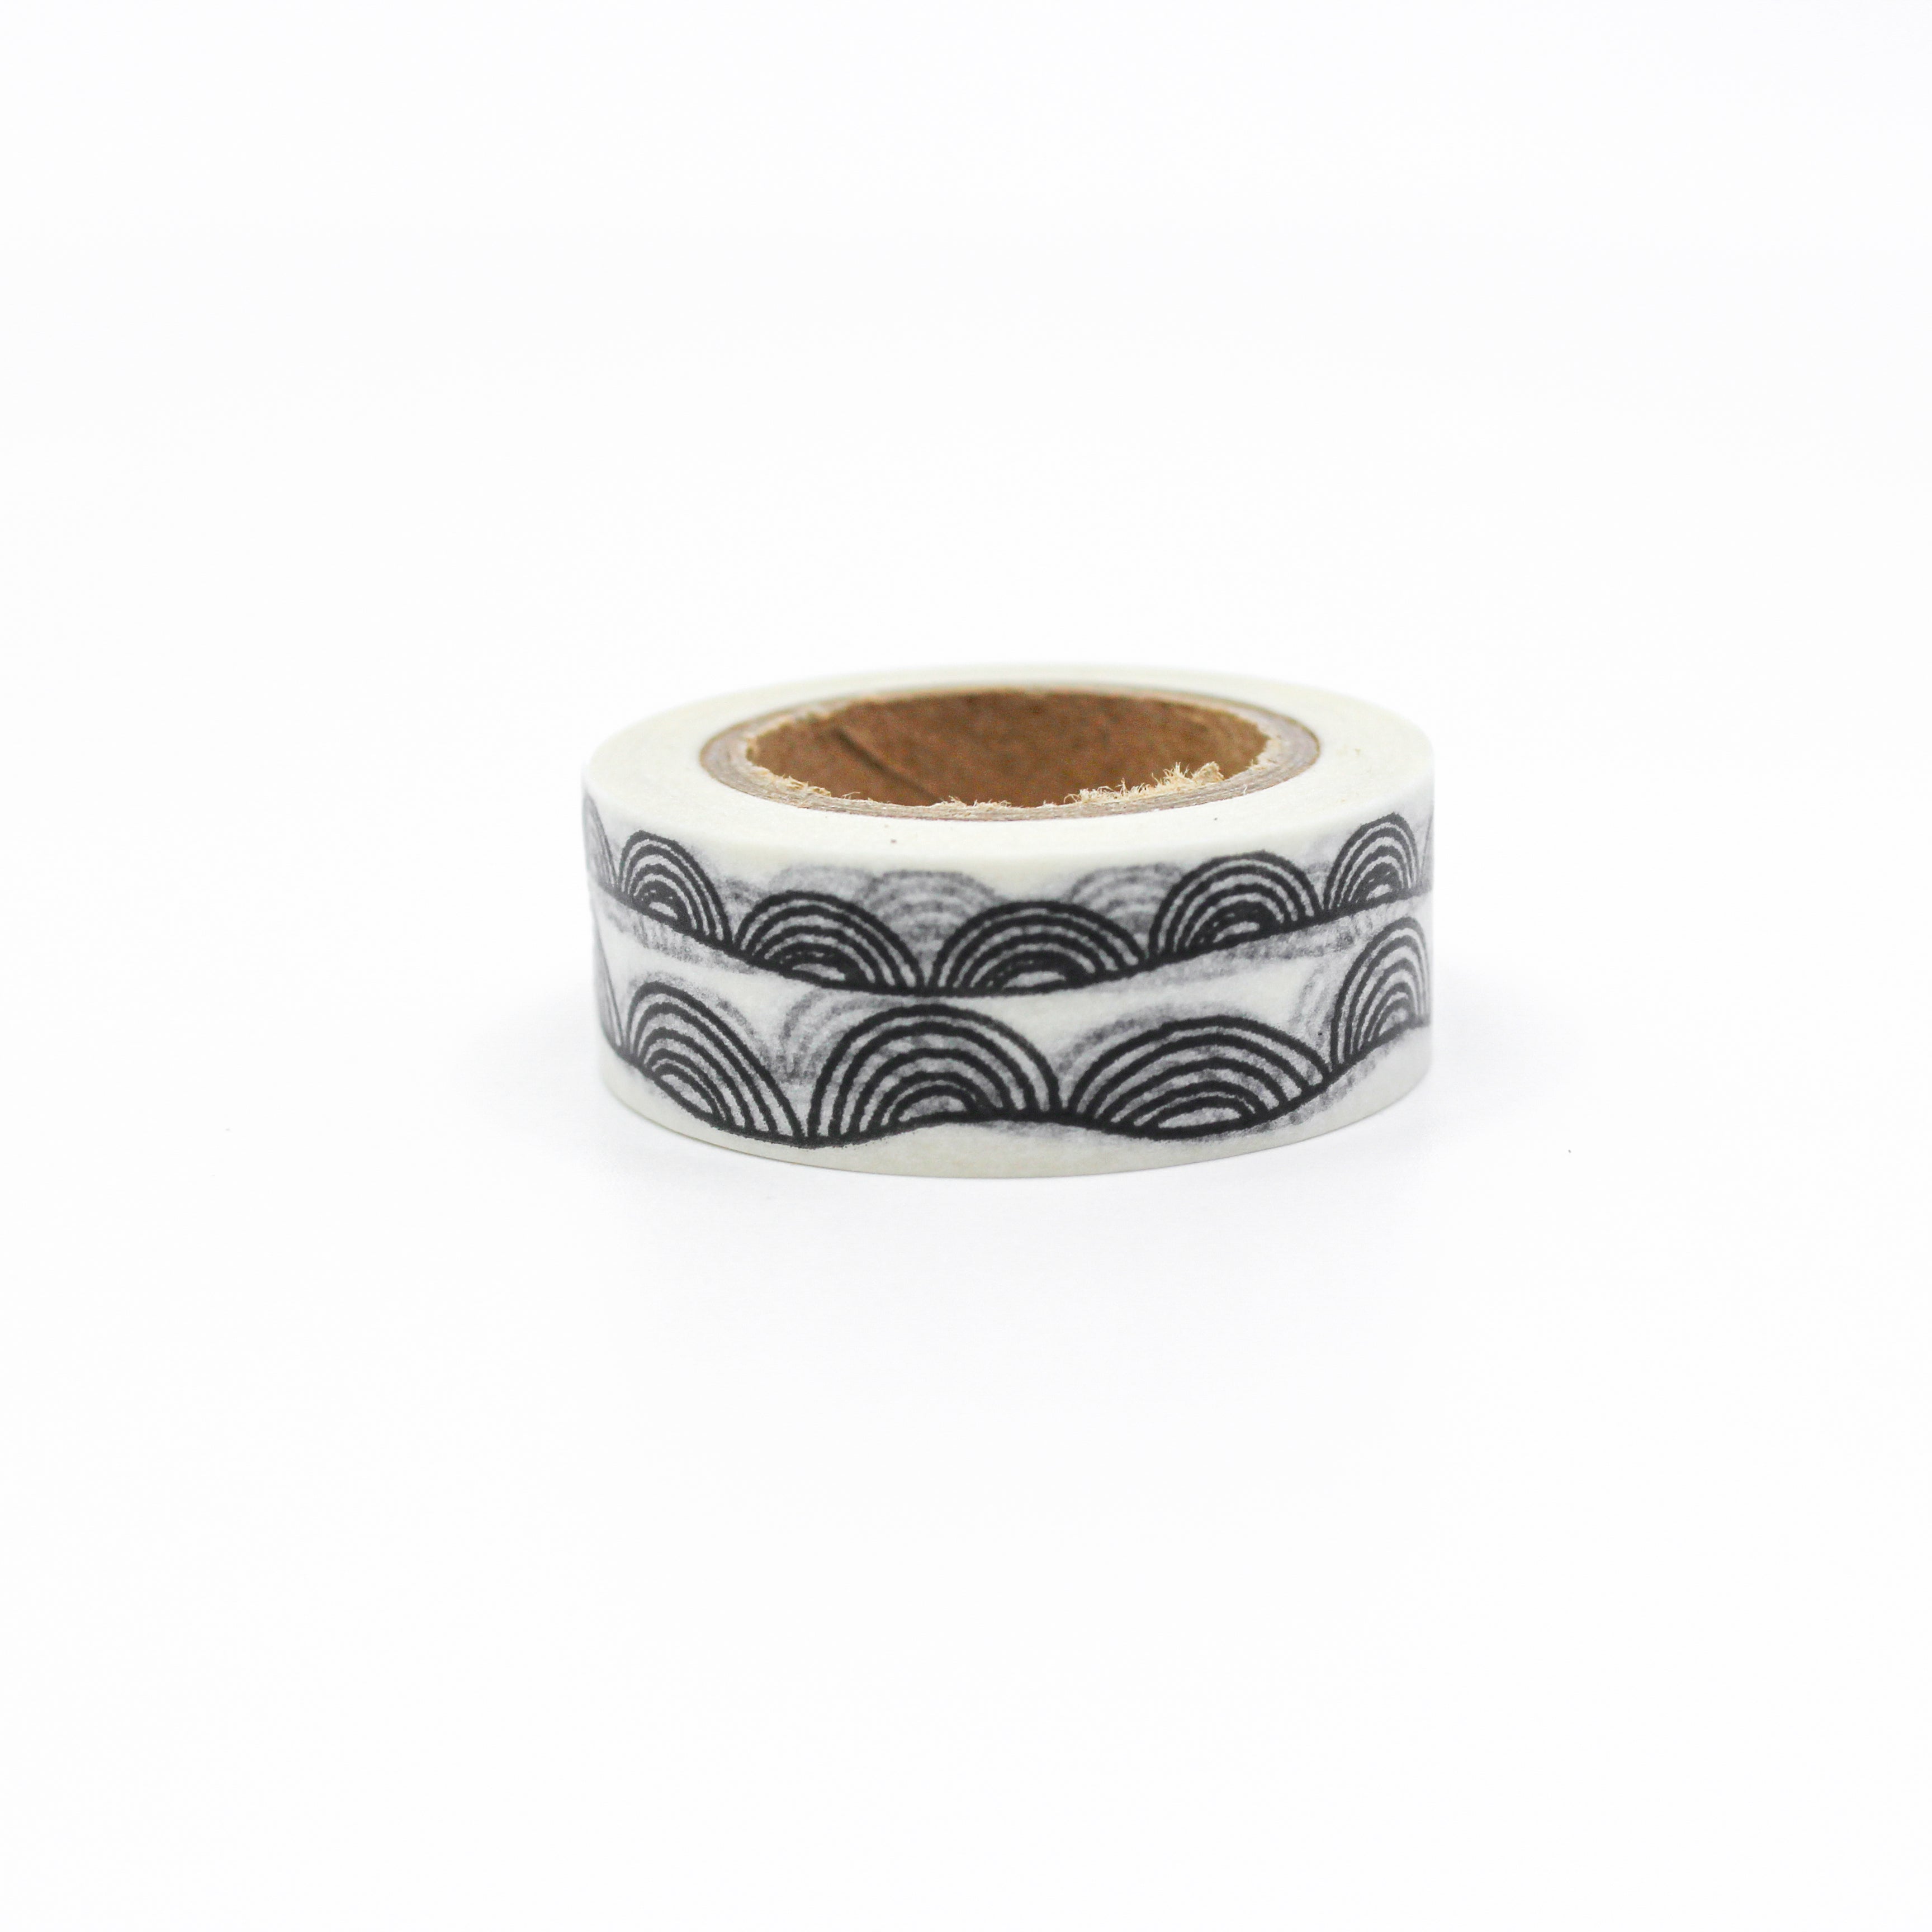 This is a double black swirly hump border washi tape from BBB Supplies Craft Shop